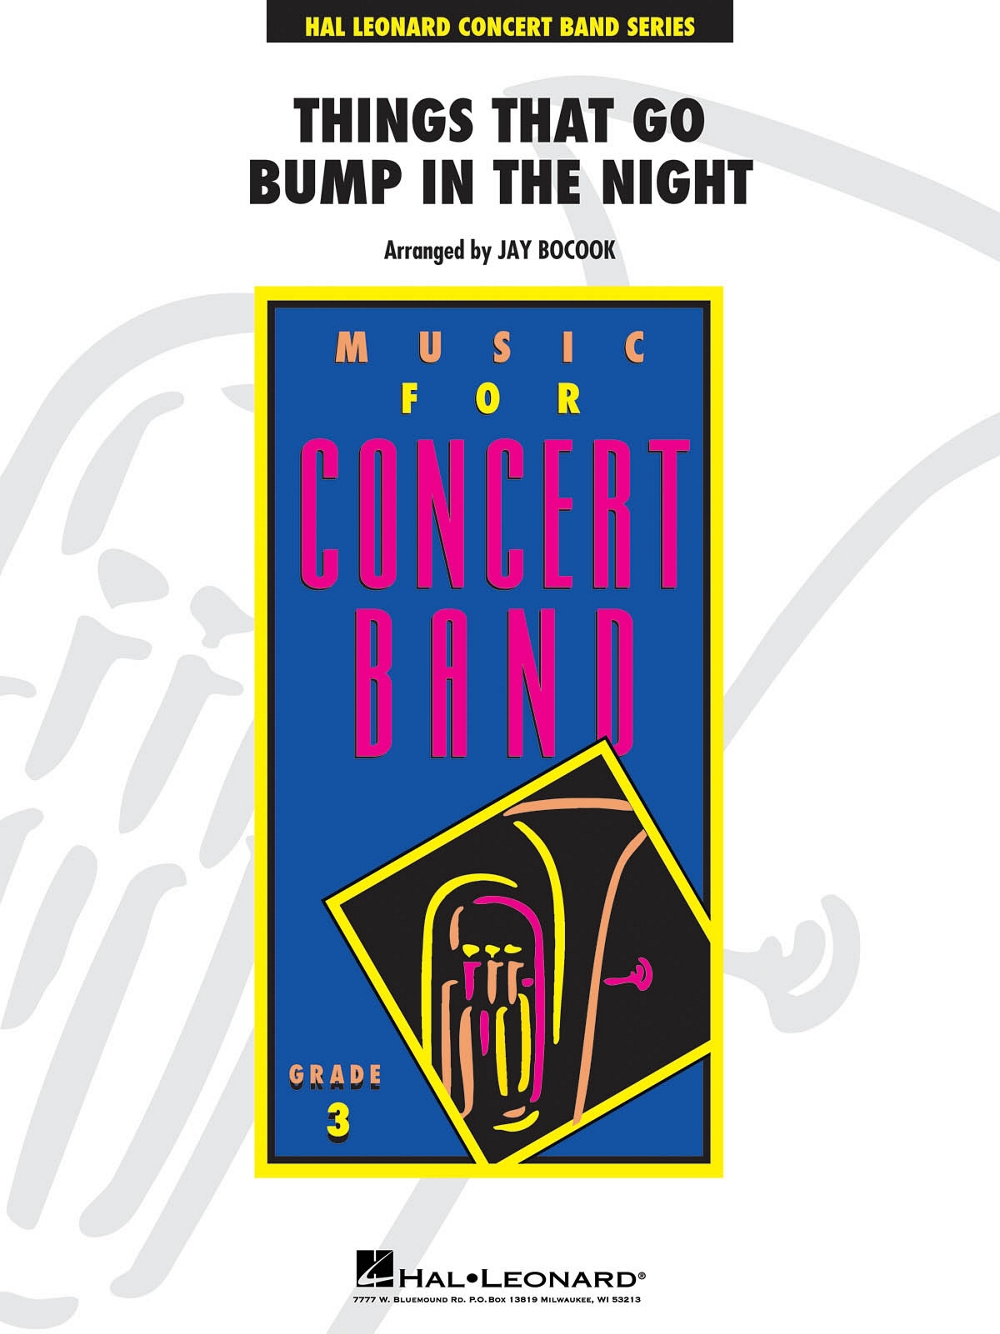 Things That Go Bump In The Night - Young Concert Band Level 3 by Jay - Things That Go Bump In The Night Midsomer